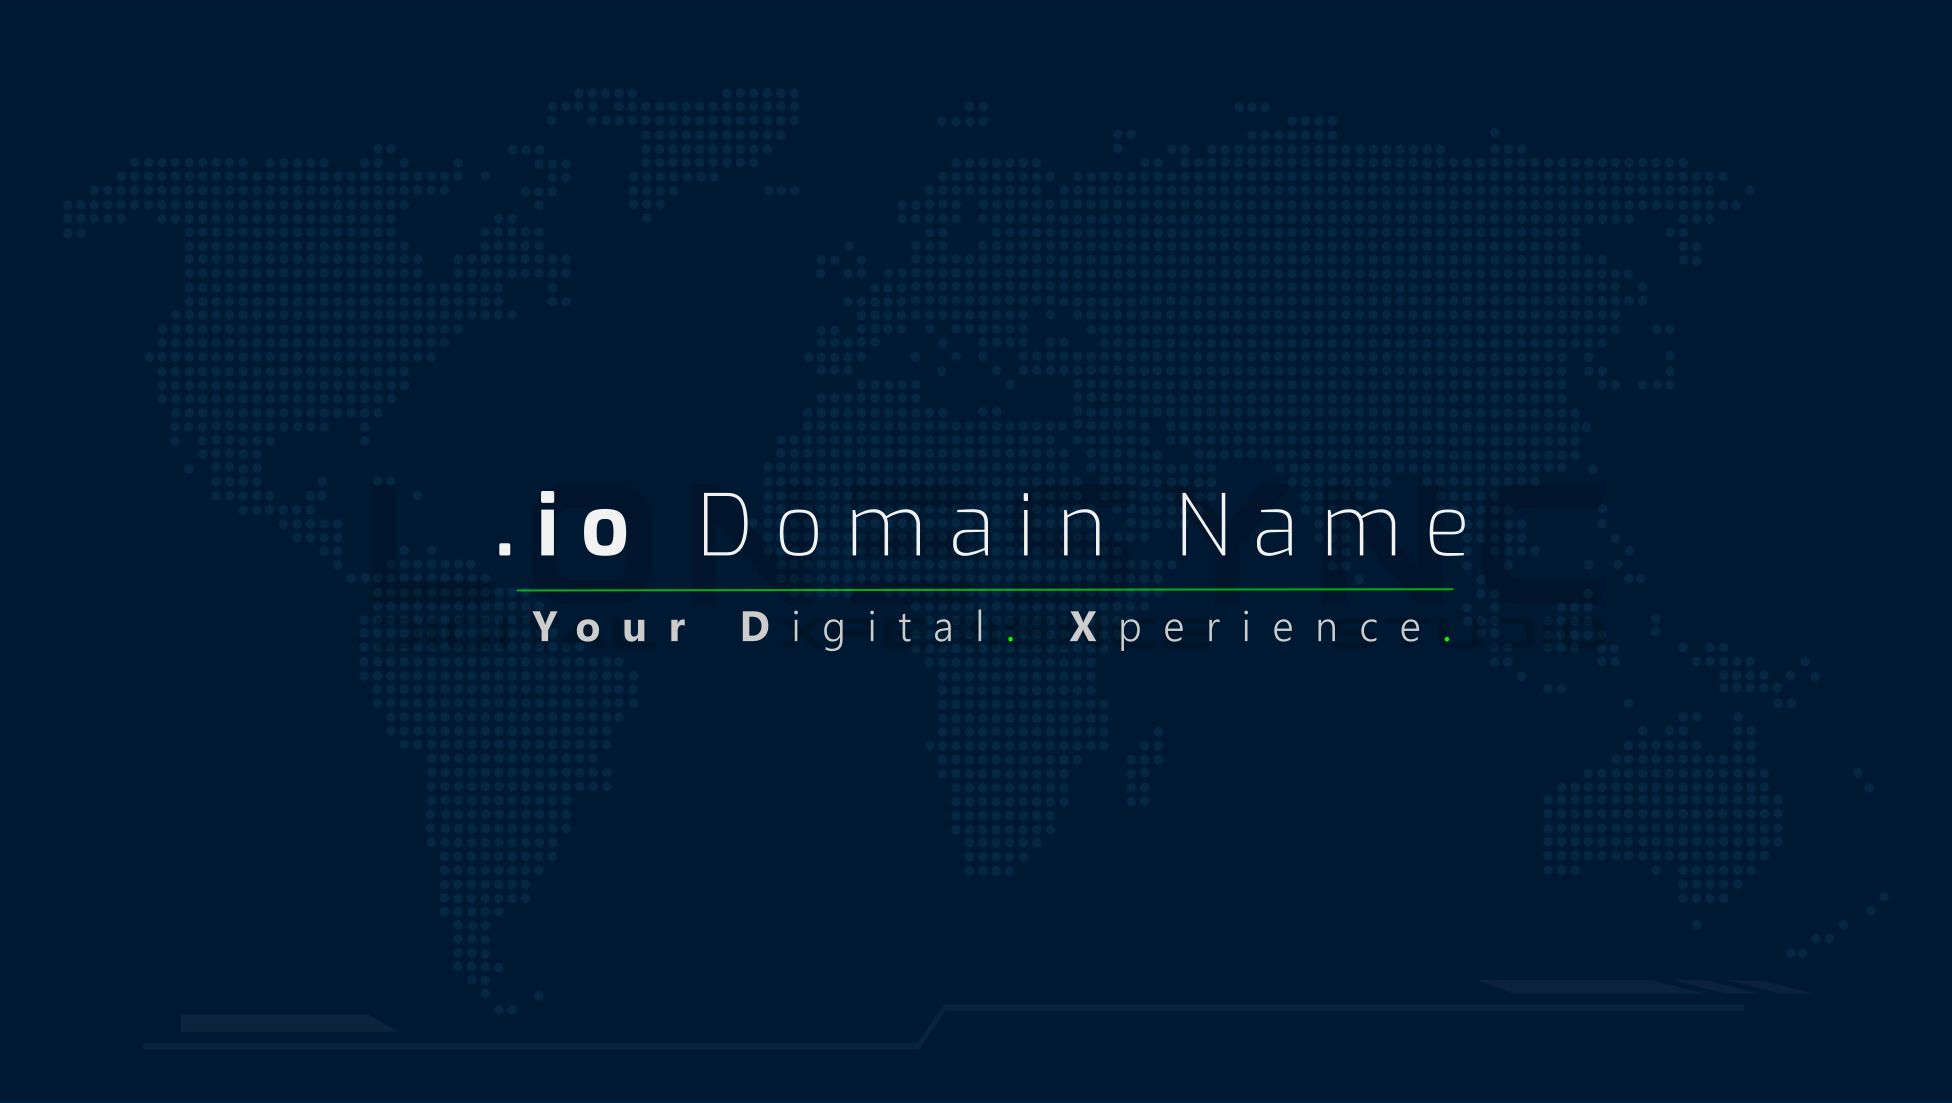 io Domain Name - Your Digital Xperience by LoneSync